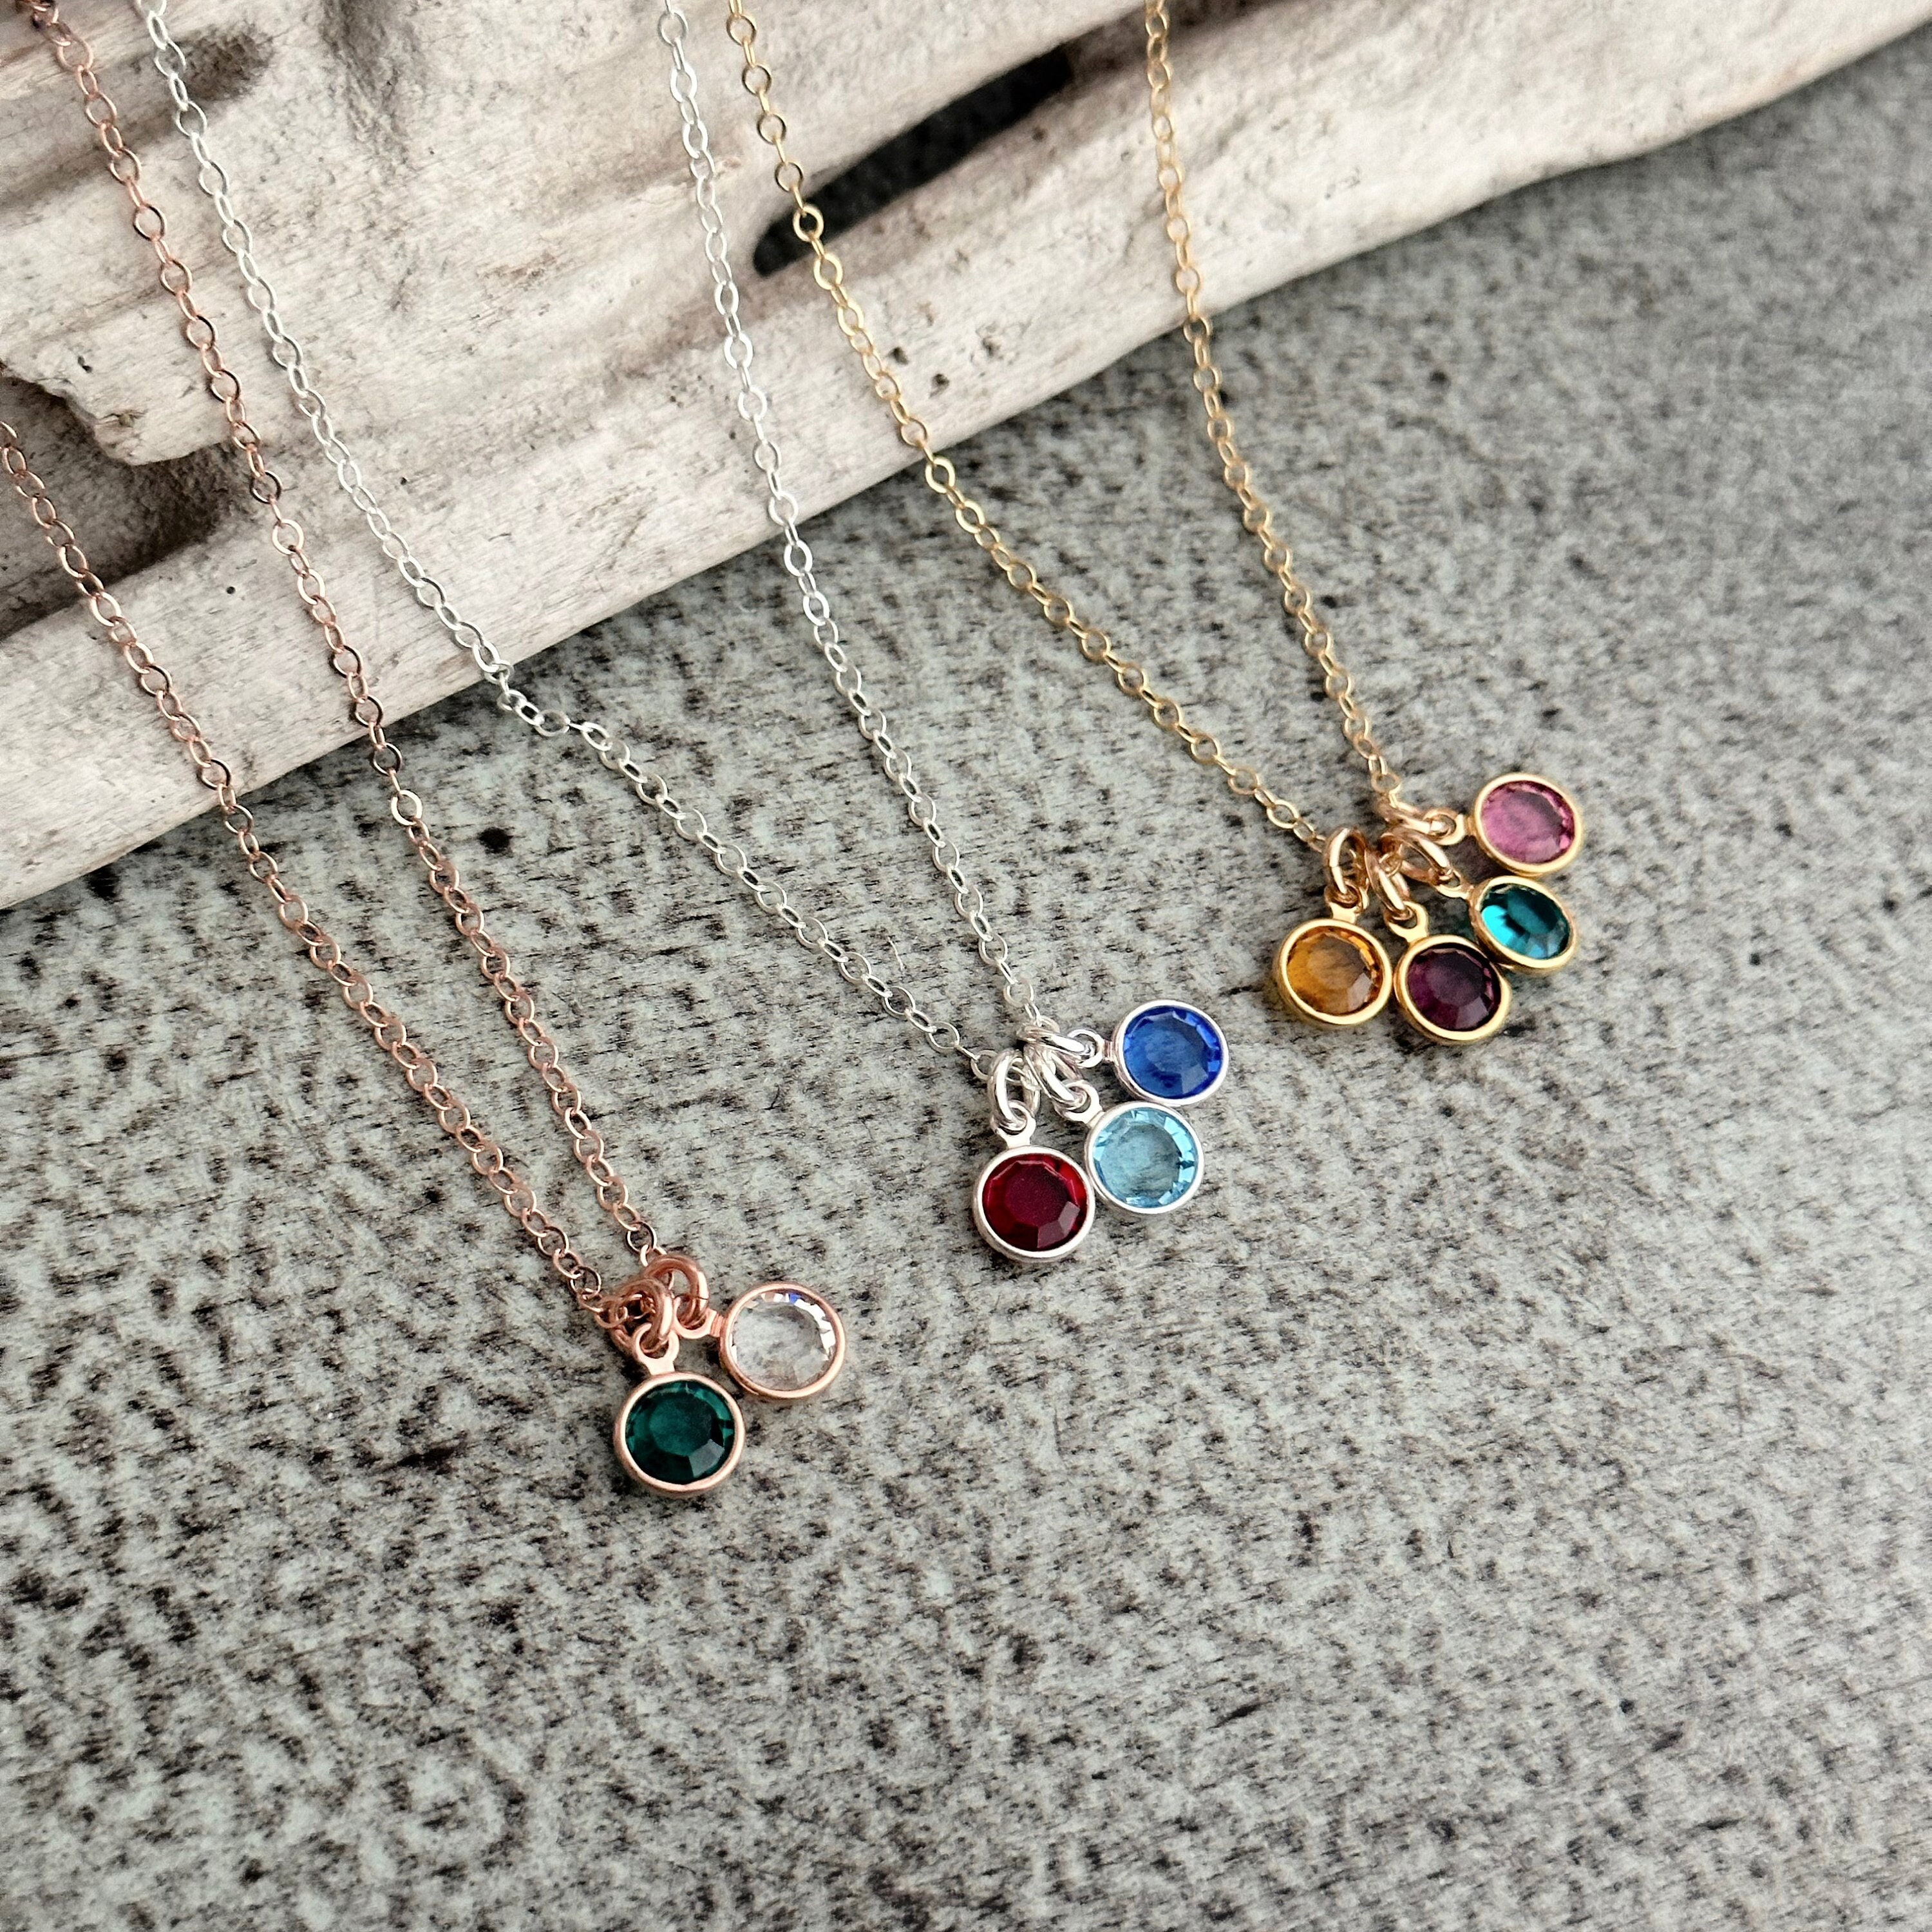 The Most Beautiful Birthstone Necklaces Unique to Your Month